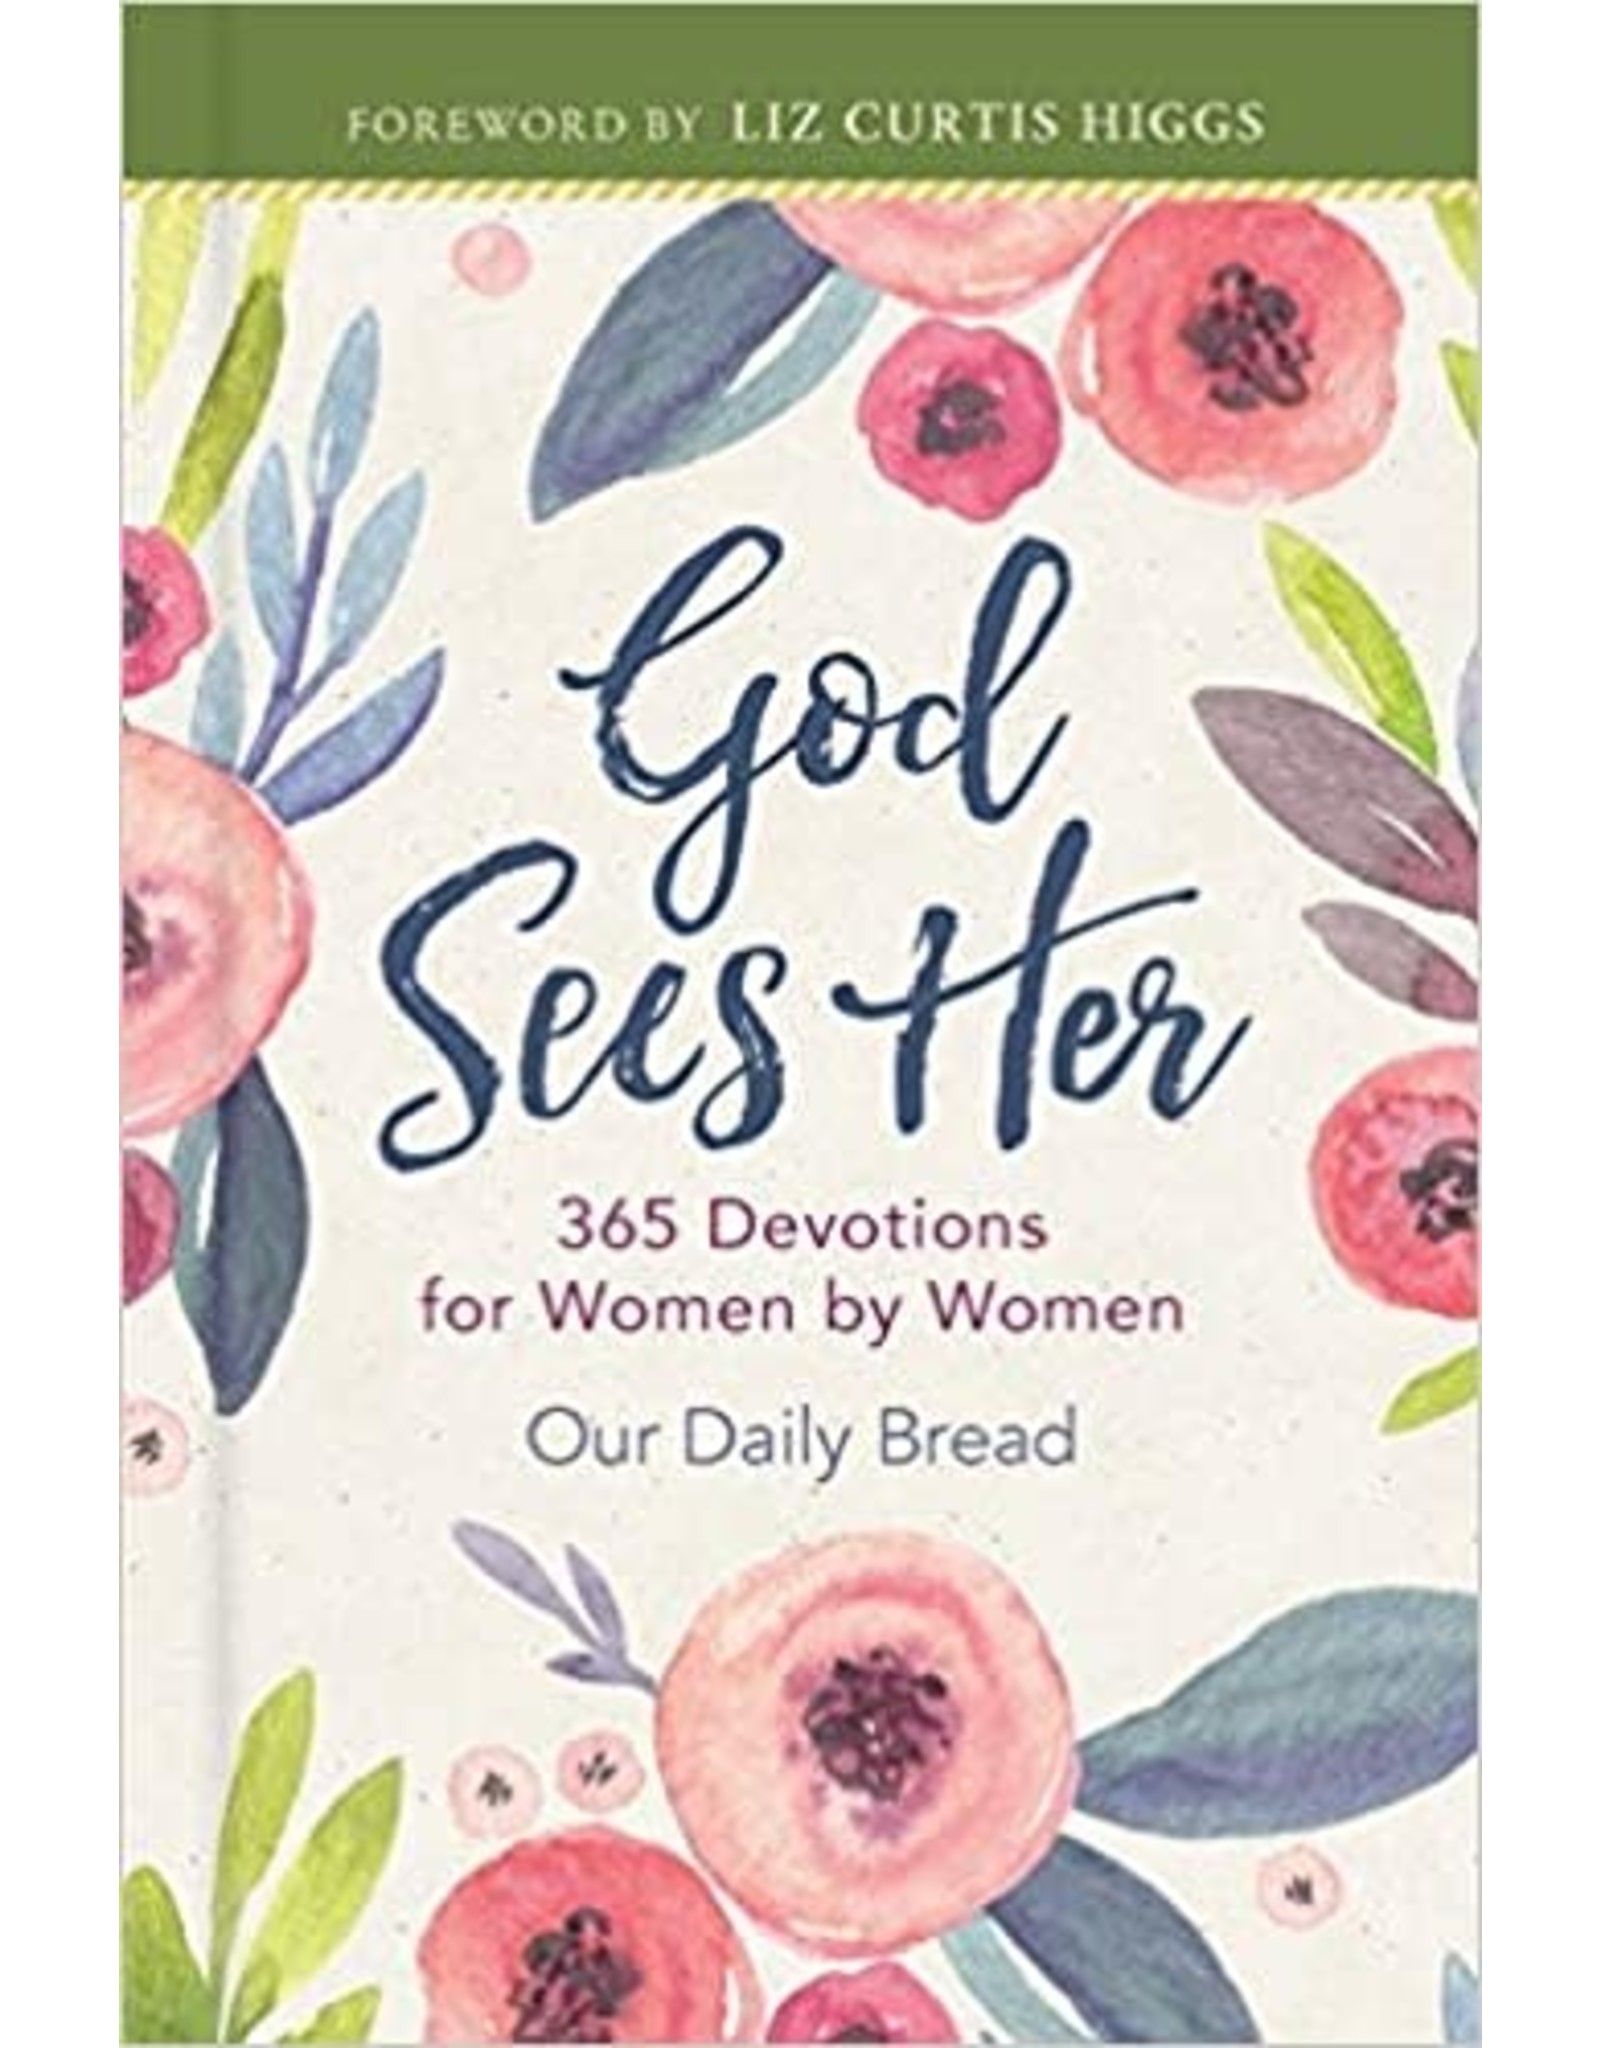 Our Daily Bread God Sees Her: 365 Devotions for Women by Women